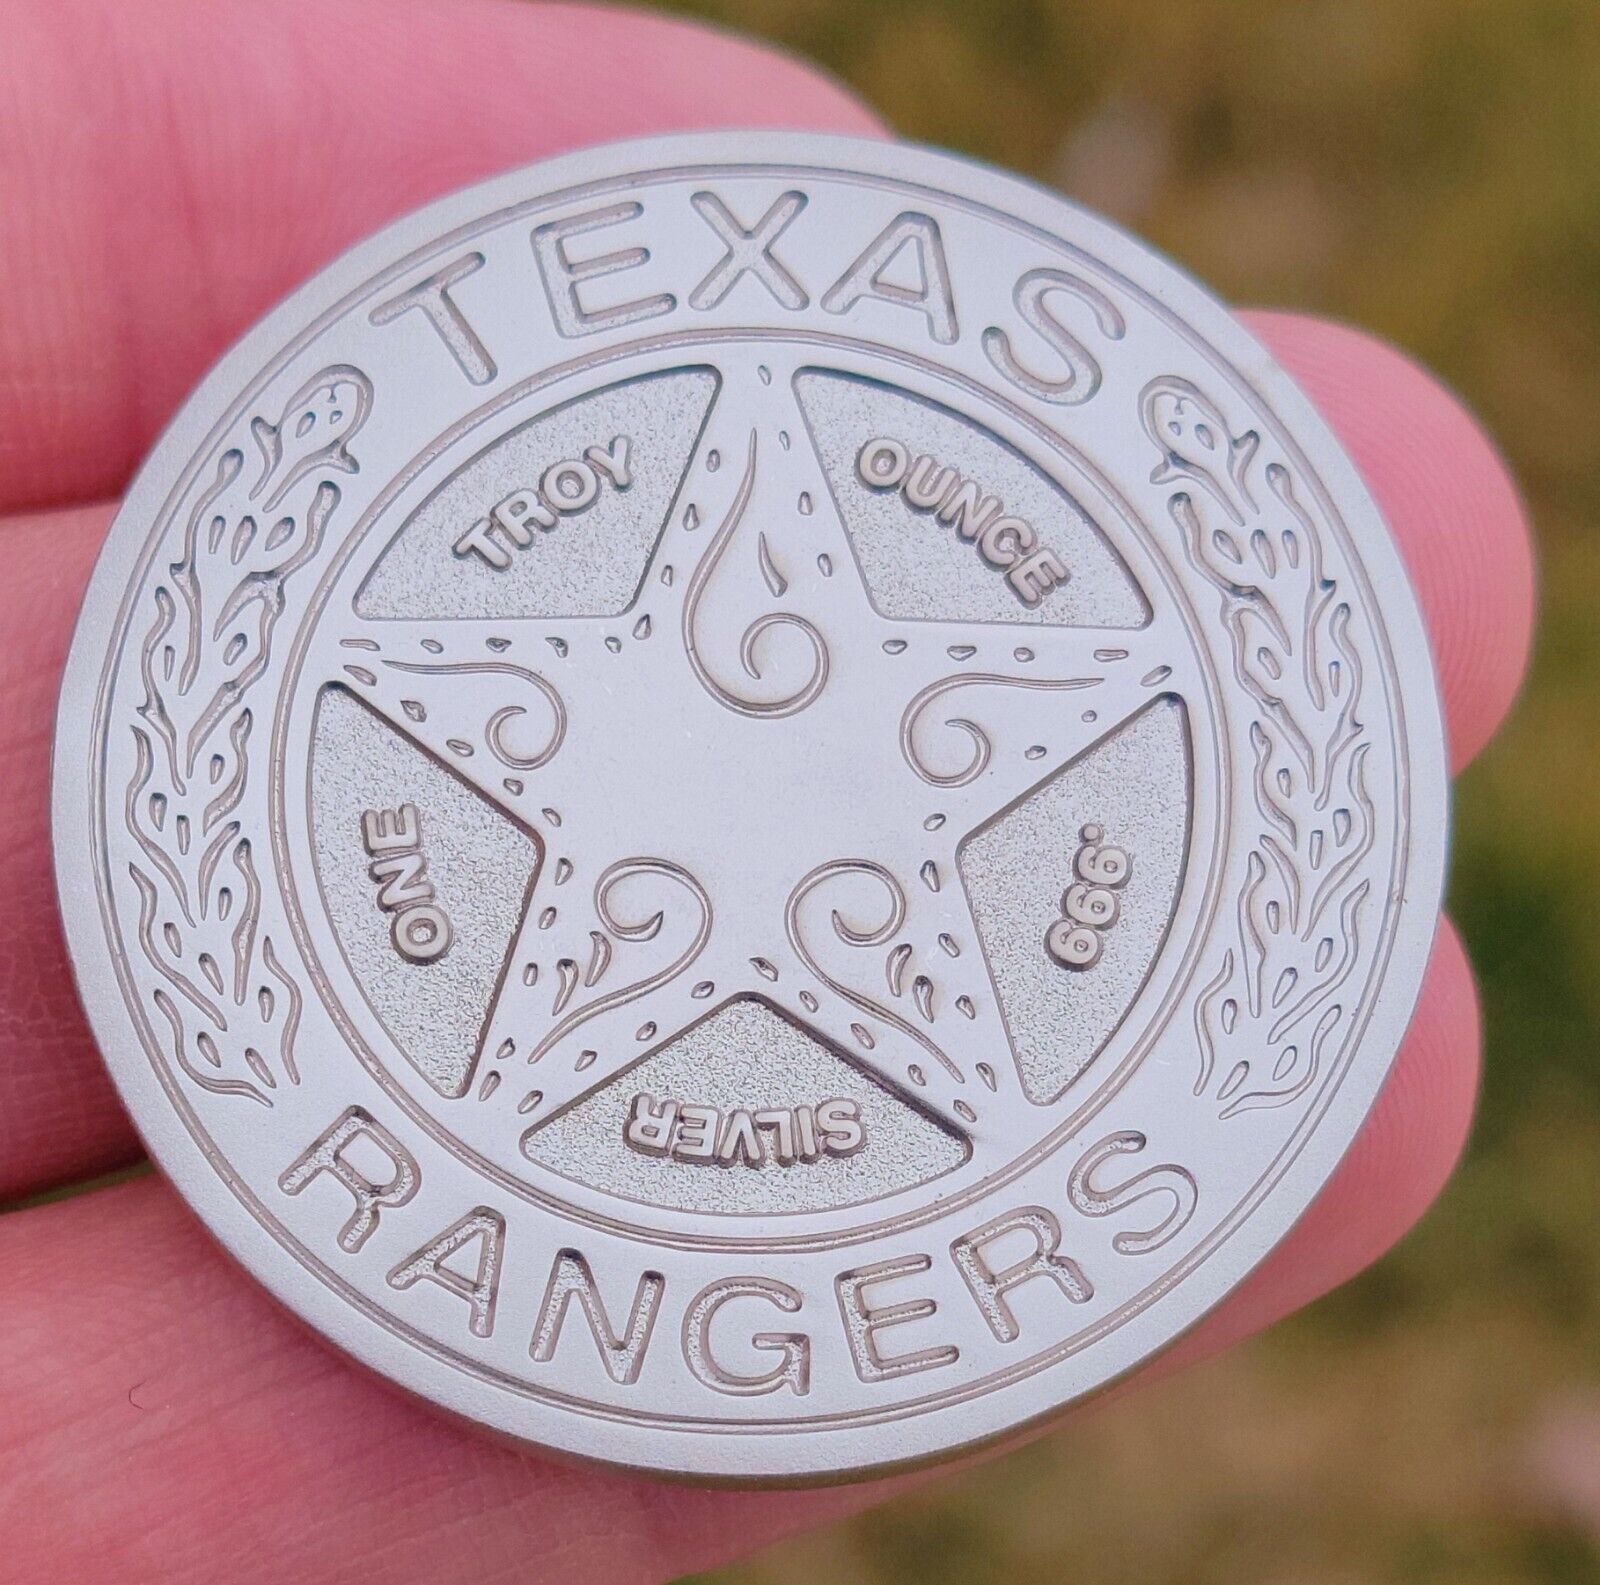 Texas Rangers Department of Public Safety Challenge Coin Rare Authentic 